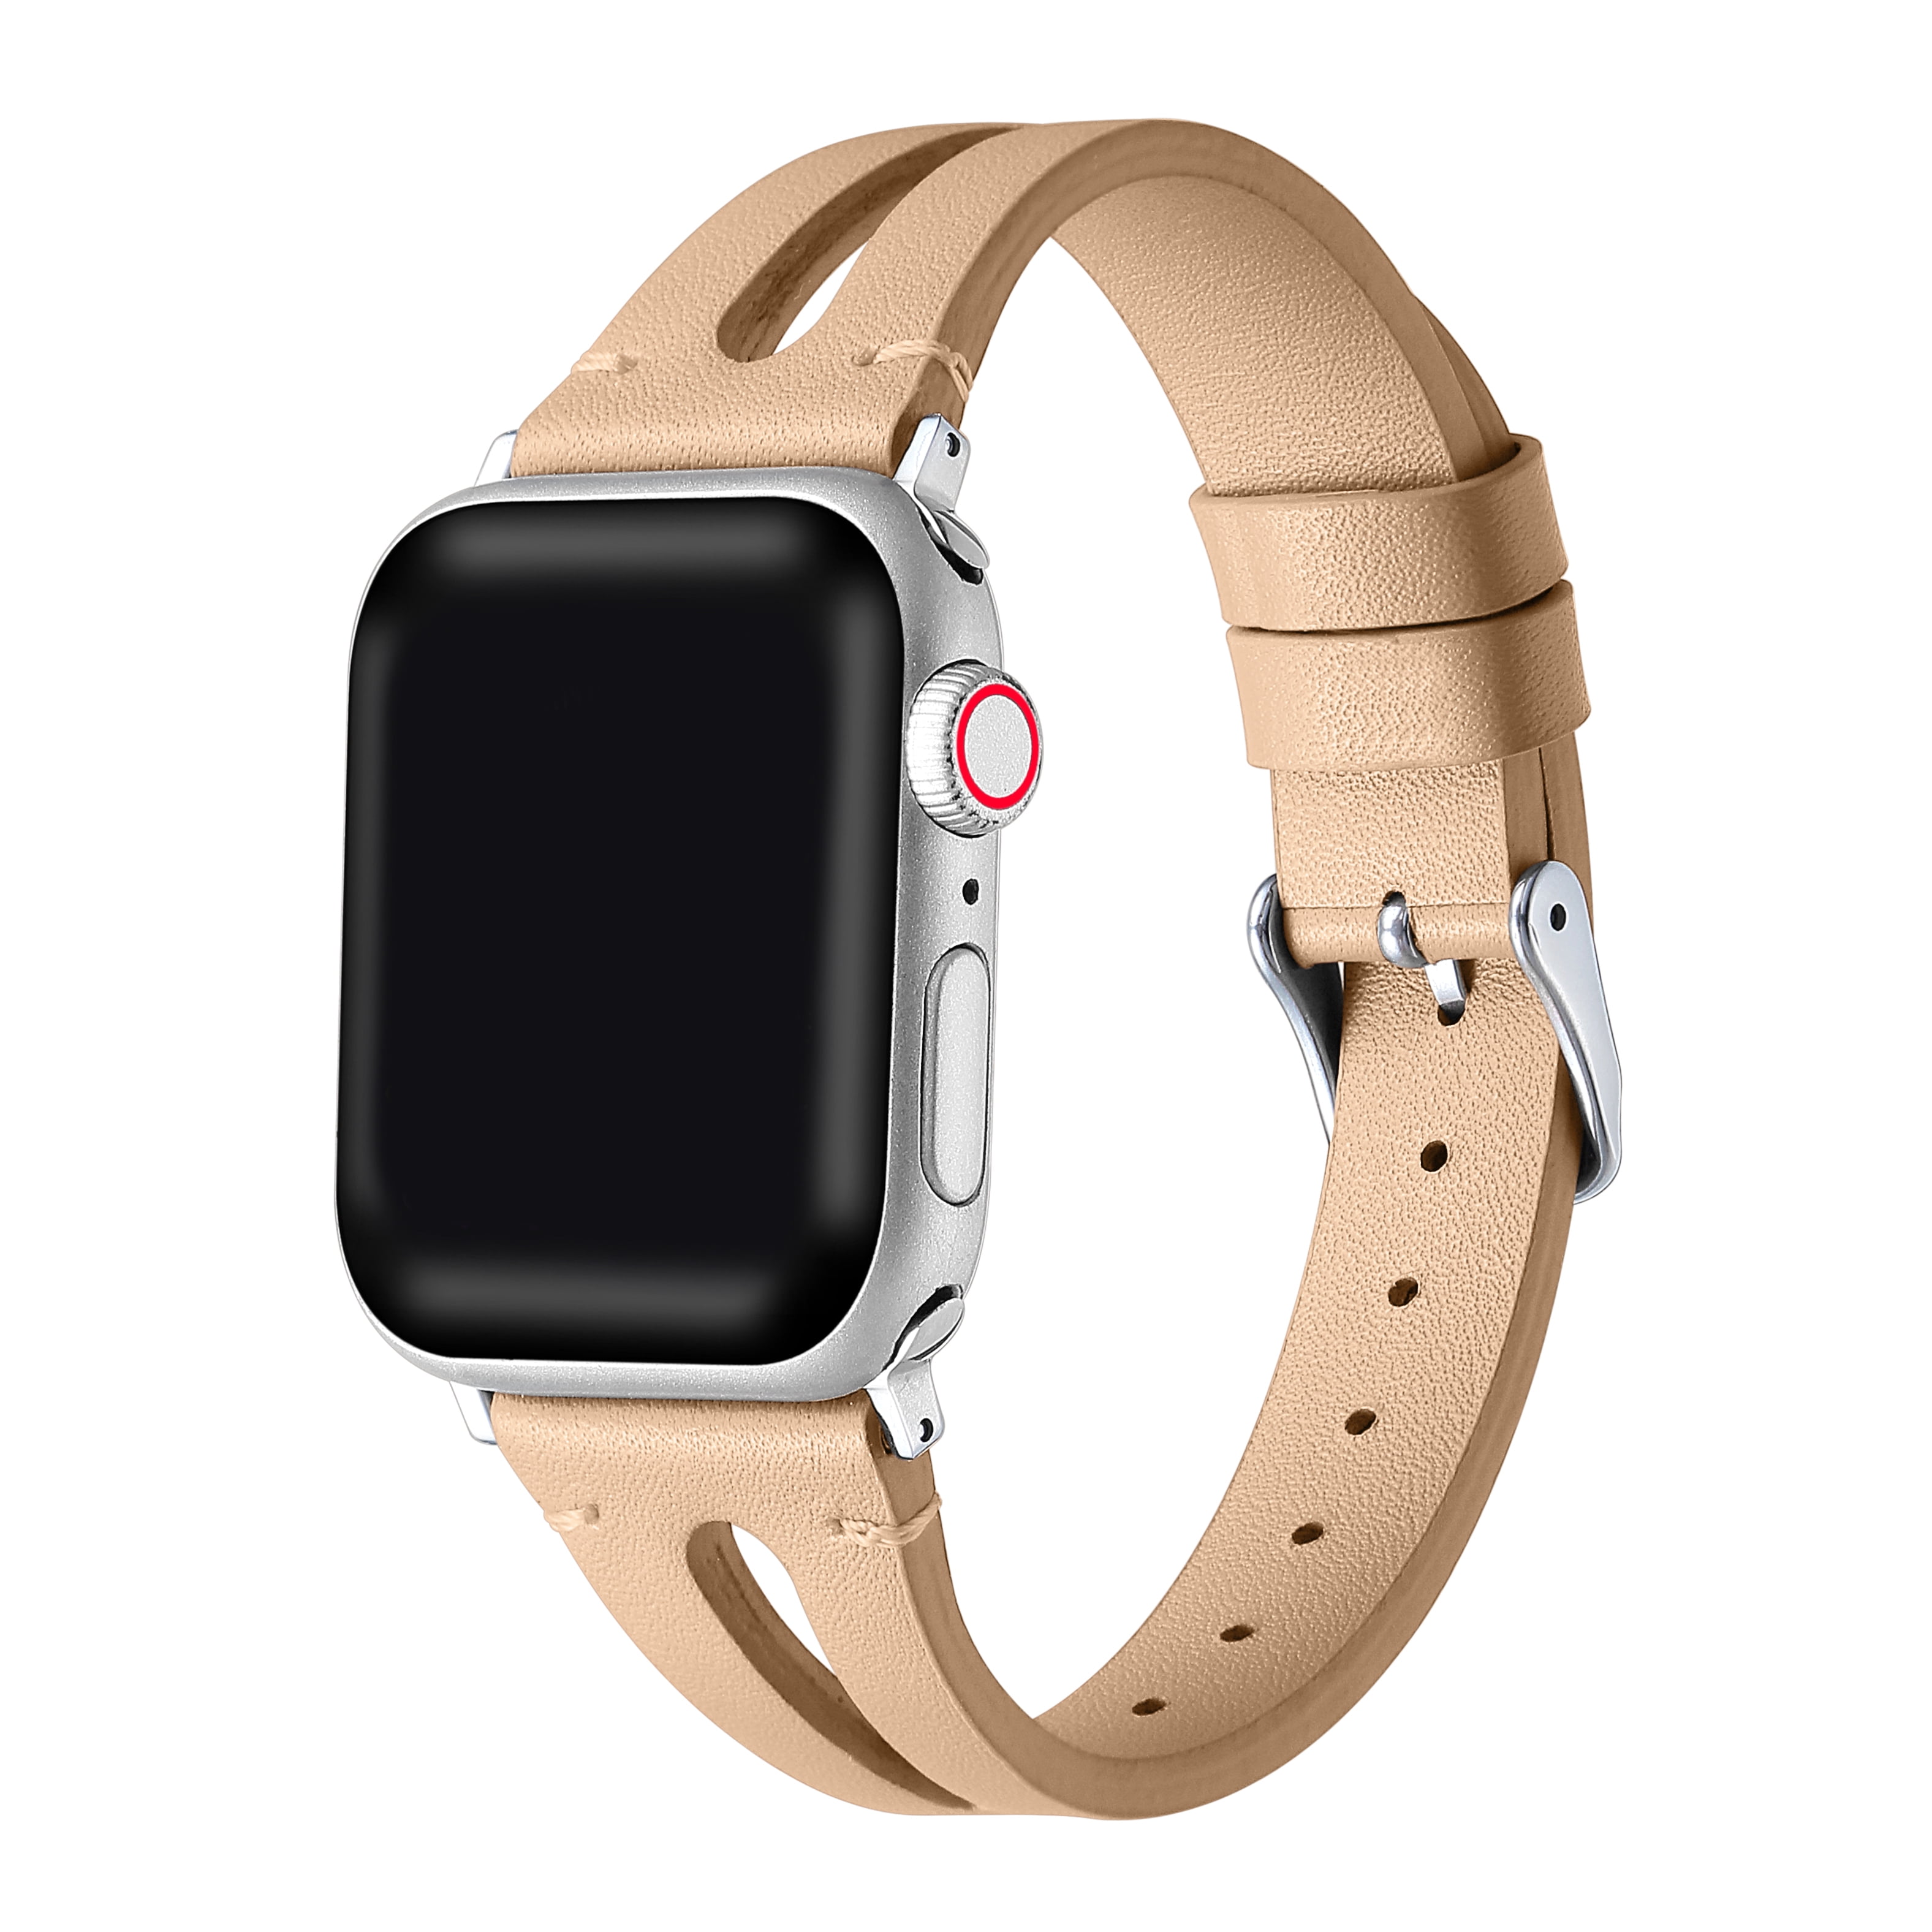 Posh Tech Sage Beige Geunine Leather Band for Apple Watch Series  1,2,3,4,5,6,7,8 & SE - Size 38mm/40mm